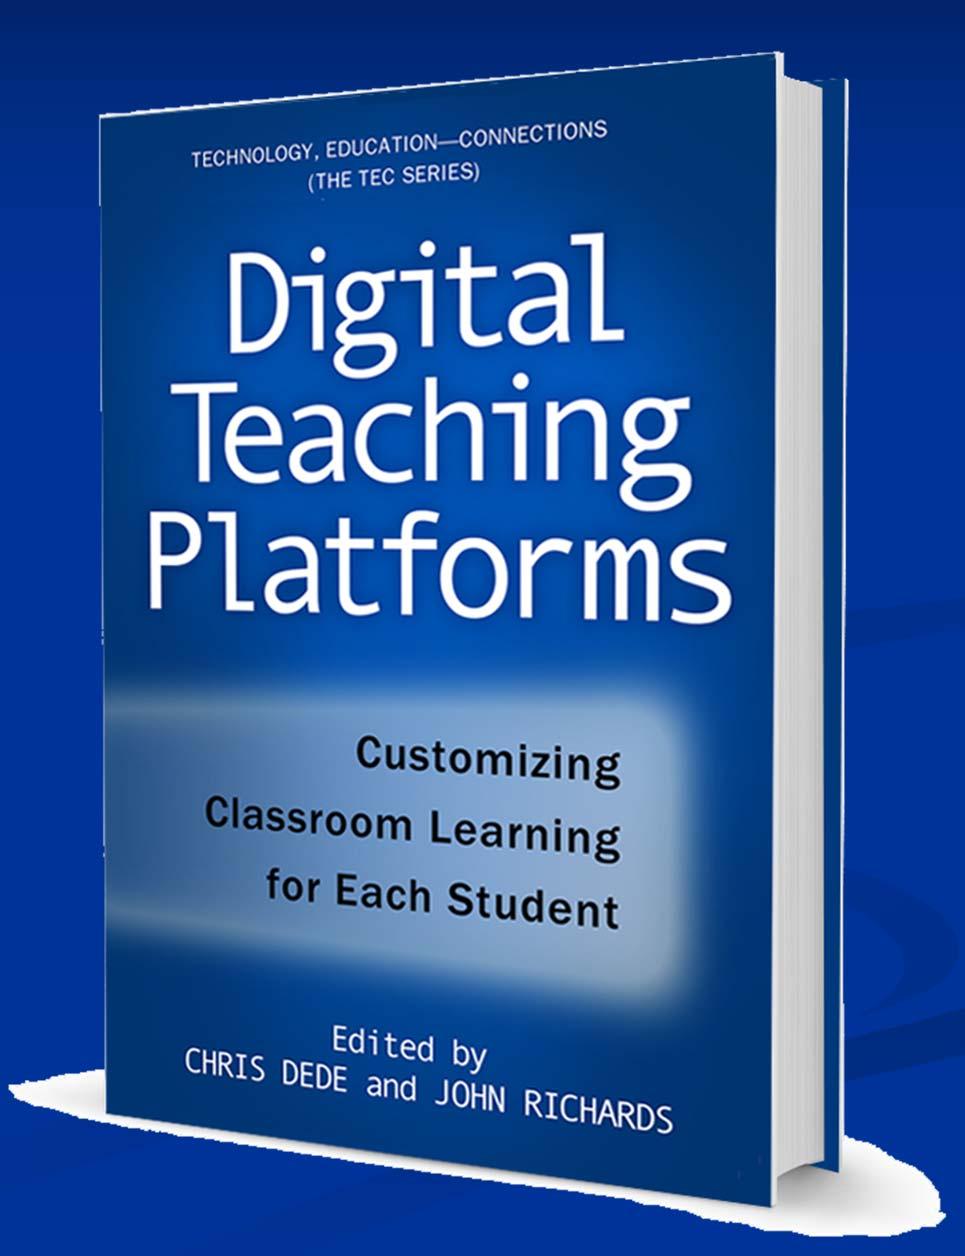 Digital Teaching Platforms (2012) How technology can empower teachers to personalize learning